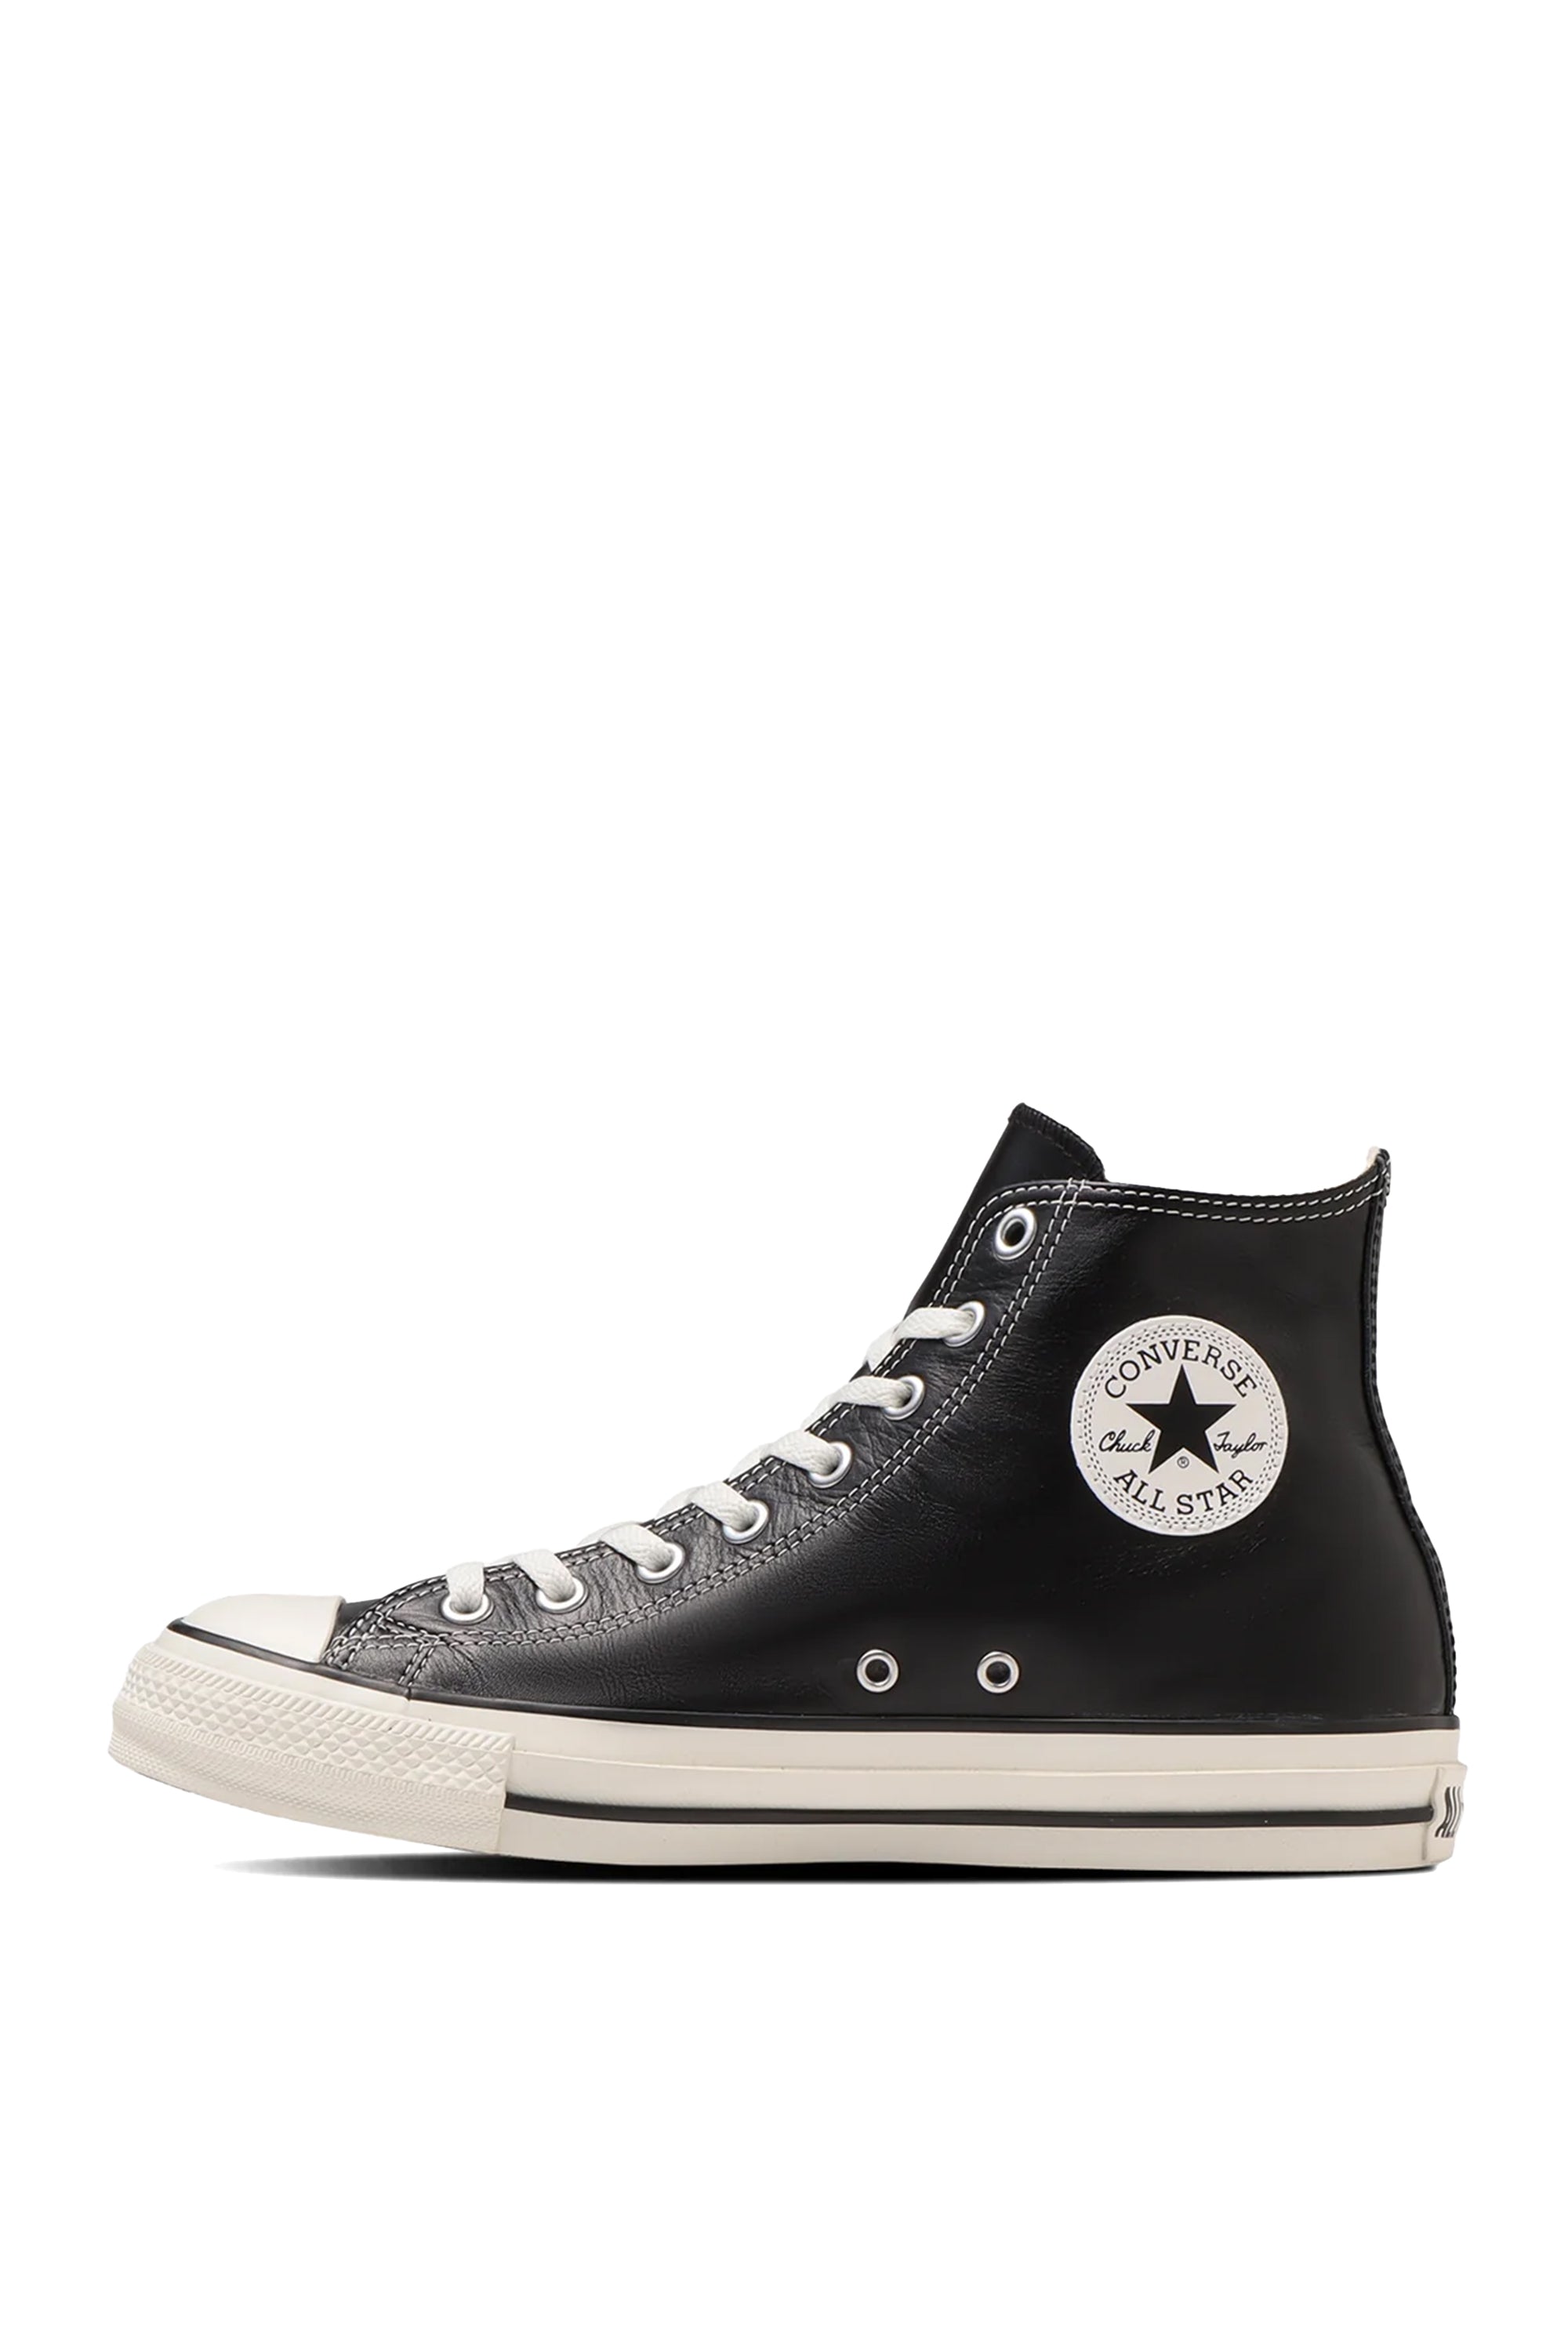 CONVERSE SS23 ALL STAR OLIVE GREEN LEATHER HI / BLK -NUBIAN